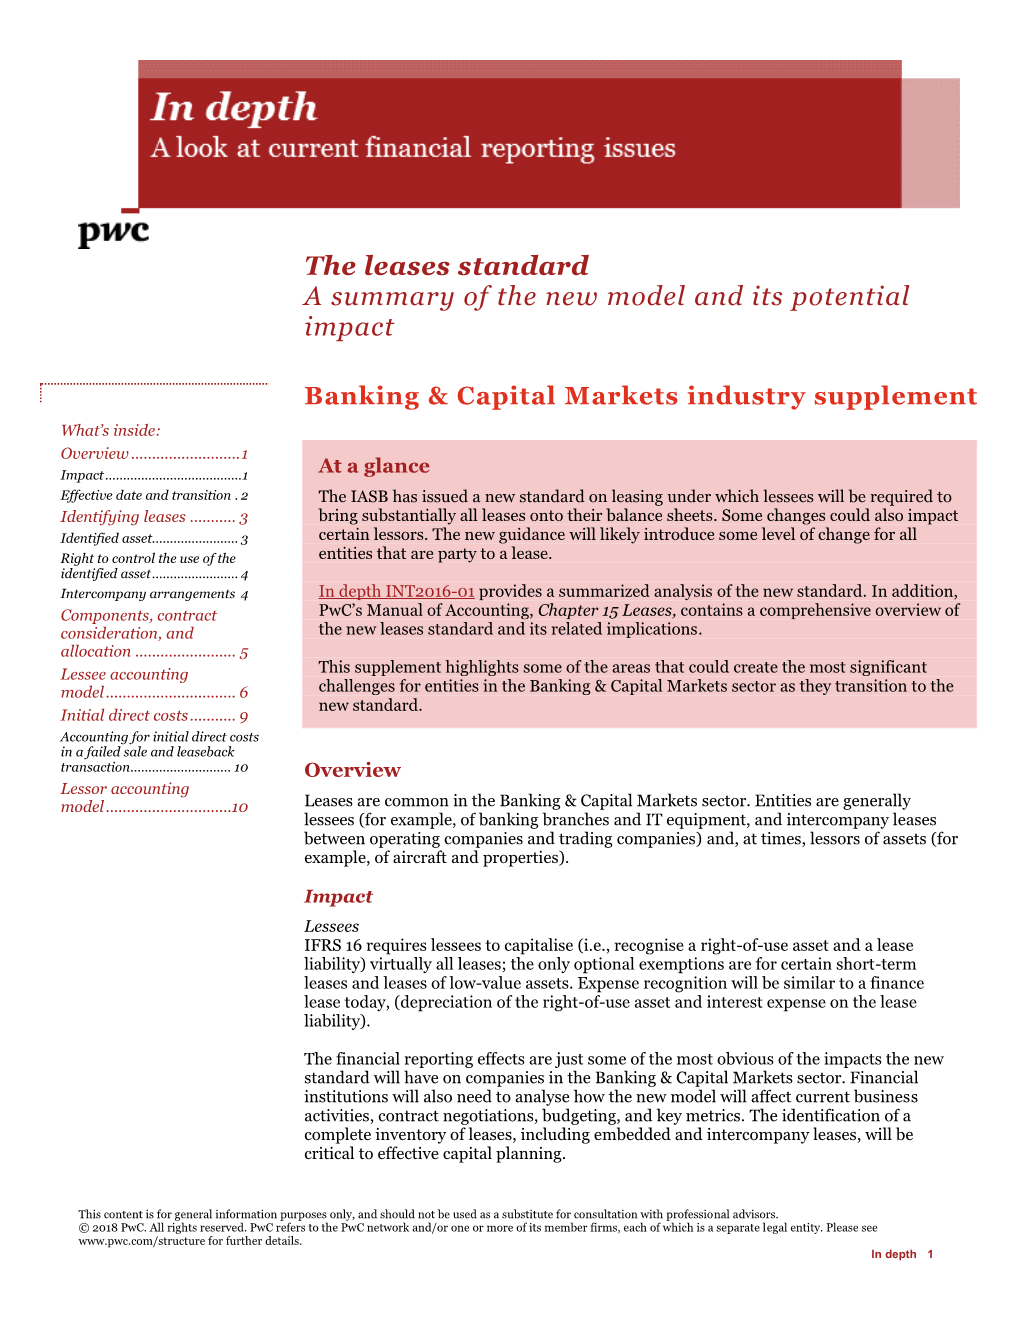 Banking & Capital Markets Industry Supplement for IFRS 16 'Leases'